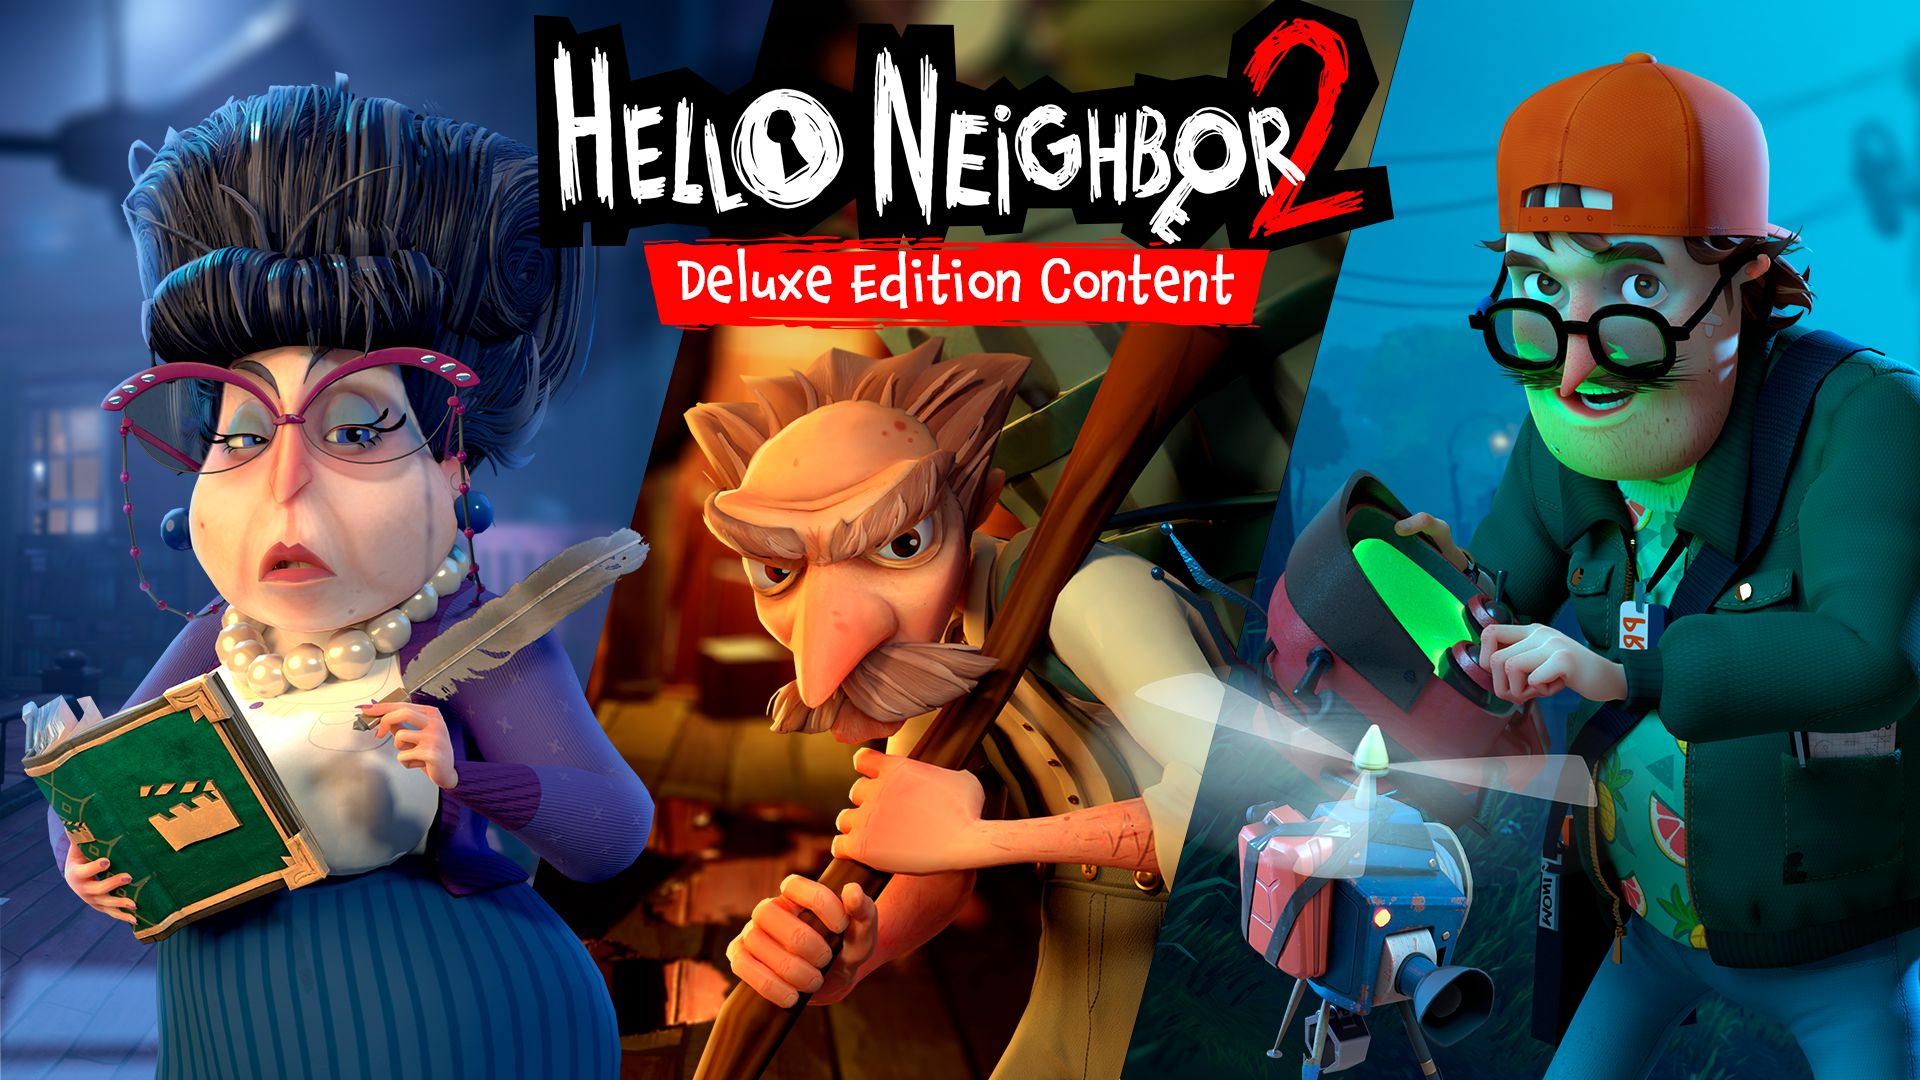 What platforms will Hello Neighbor 2 be on?